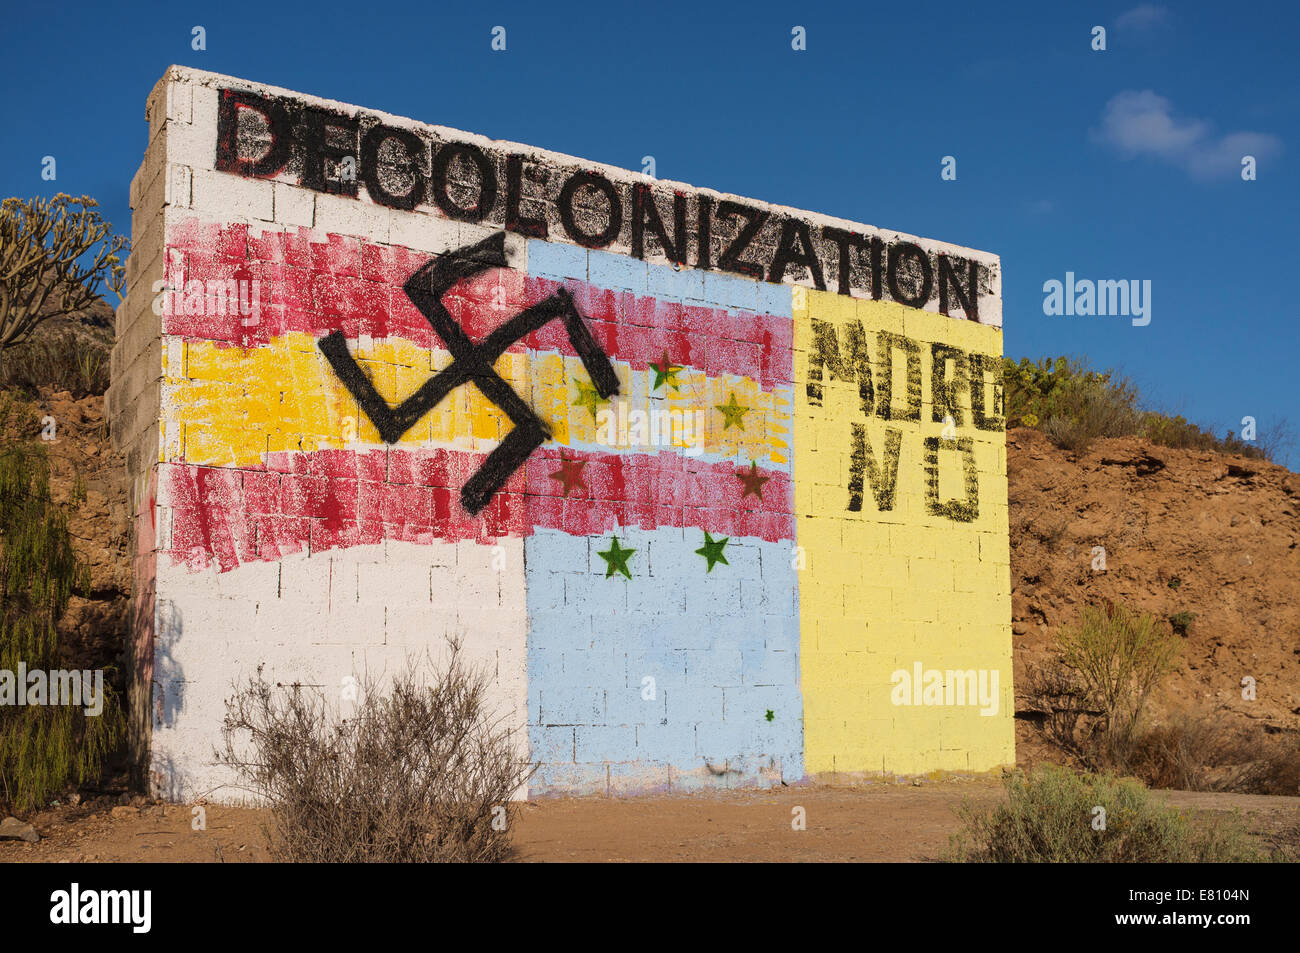 Graffiti on a wall in front of Guaza mountain, Tenerife, Canary Islands, Spain. The base is the flag of the canaries independence movement overpainted with the Spanish flag and swastika. Decolonization is a call for independence from Spain, and the Spanish flag, swastika and moro no have been added afterwards. Stock Photo